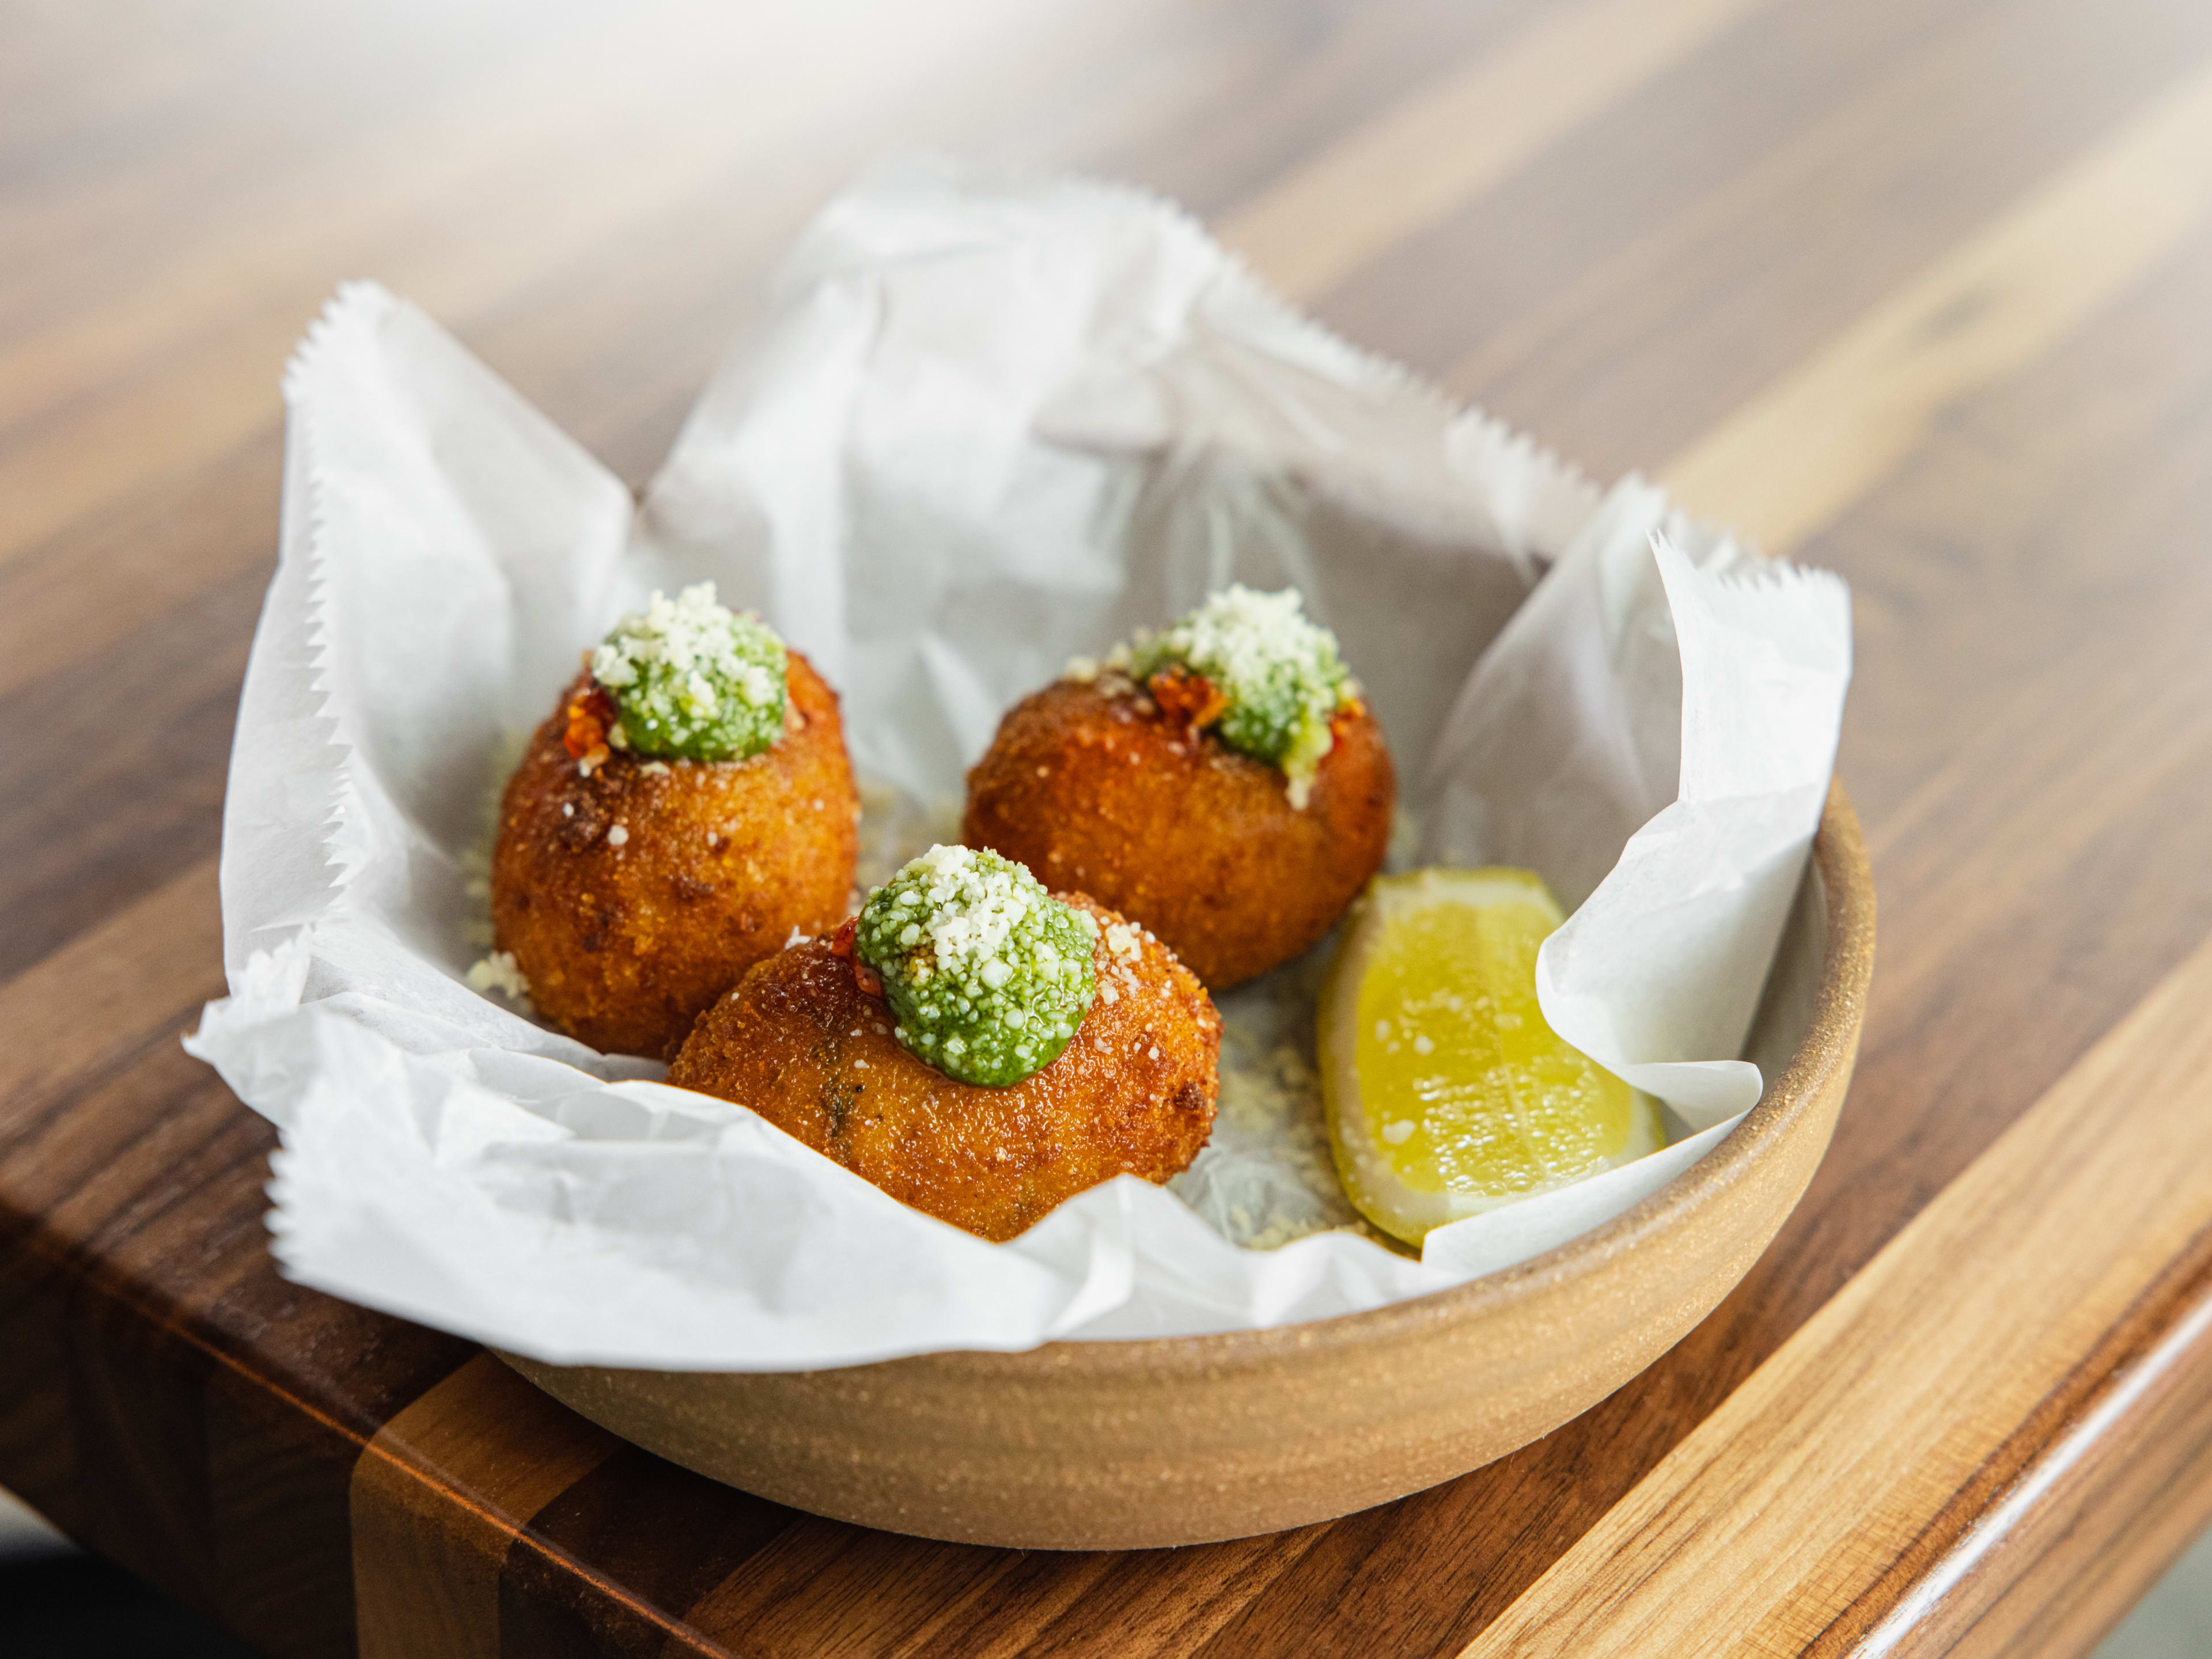 A bowl of arancini with a lemon wedge on the side.